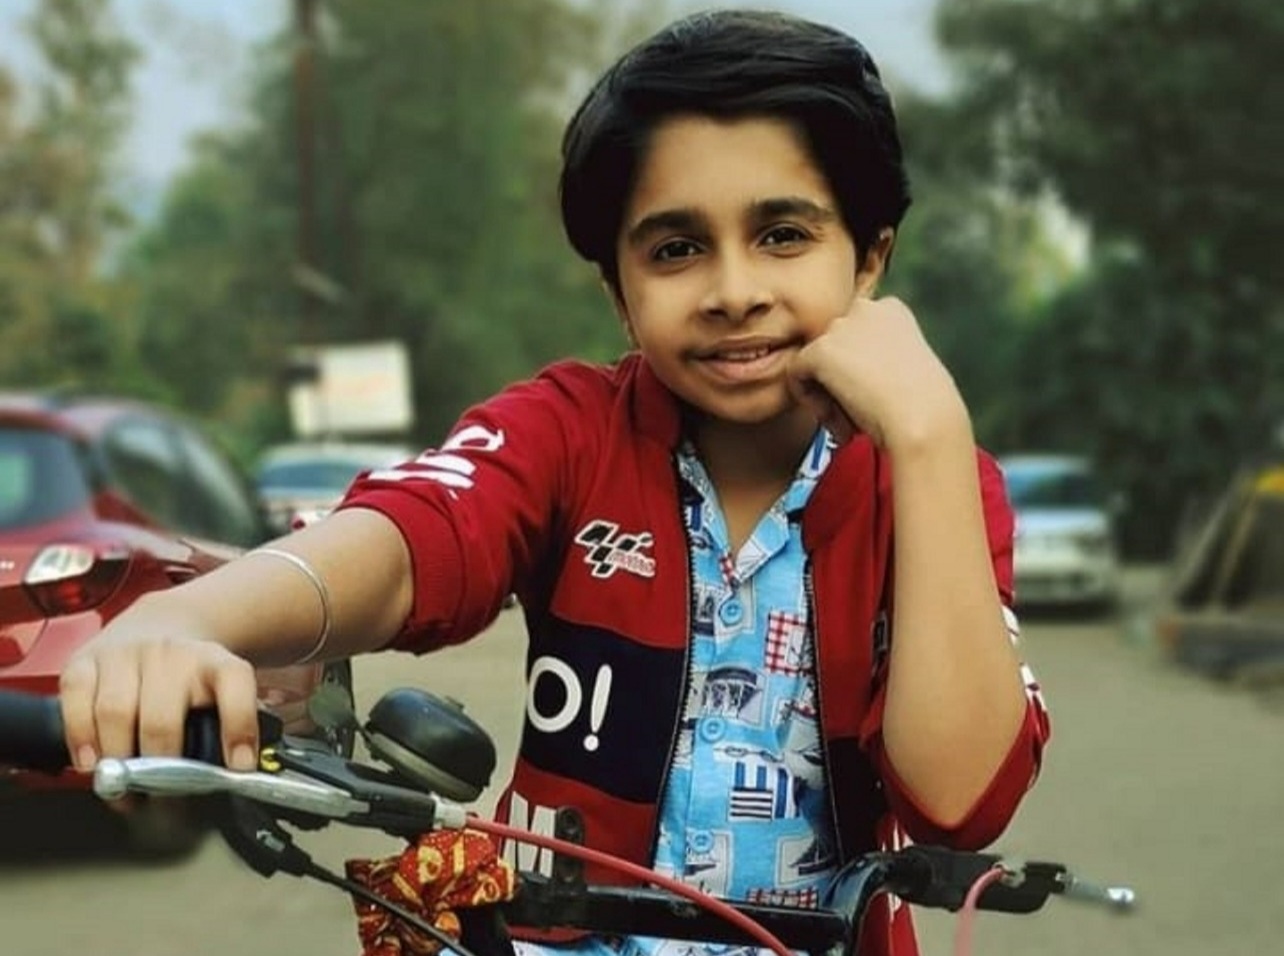 &TV actors RJ Mohit, Aaryan Prajapati, and Aasif Sheikh urge people to ‘Pedal for Health’!